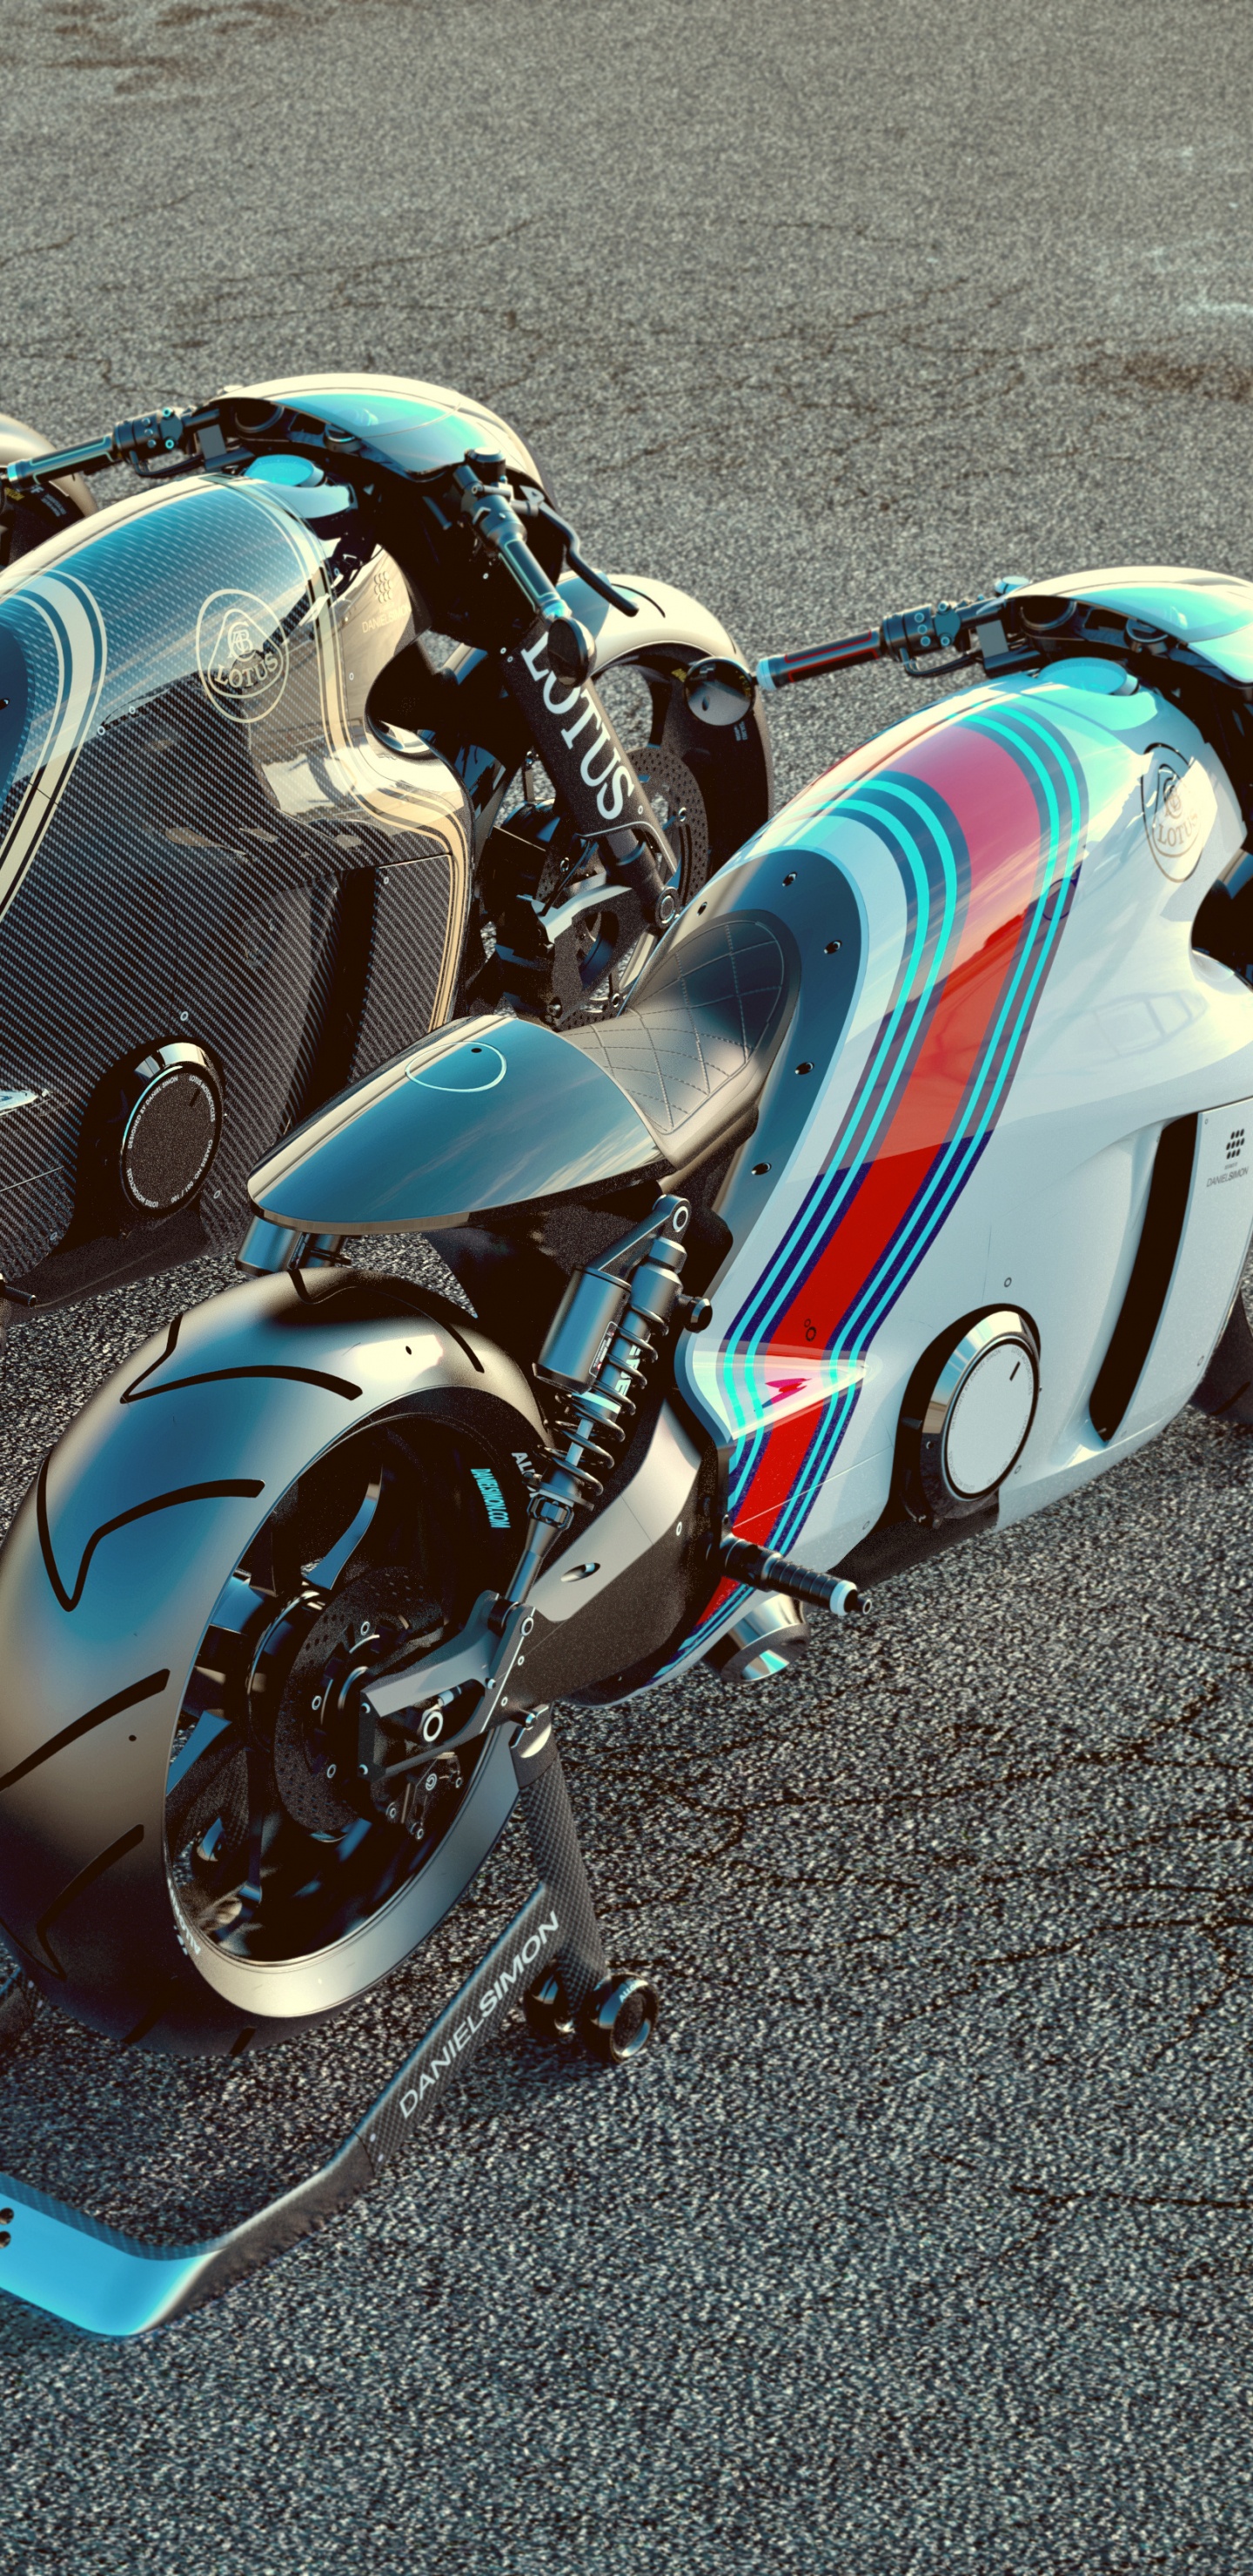 White Green and Black Sports Bike. Wallpaper in 1440x2960 Resolution